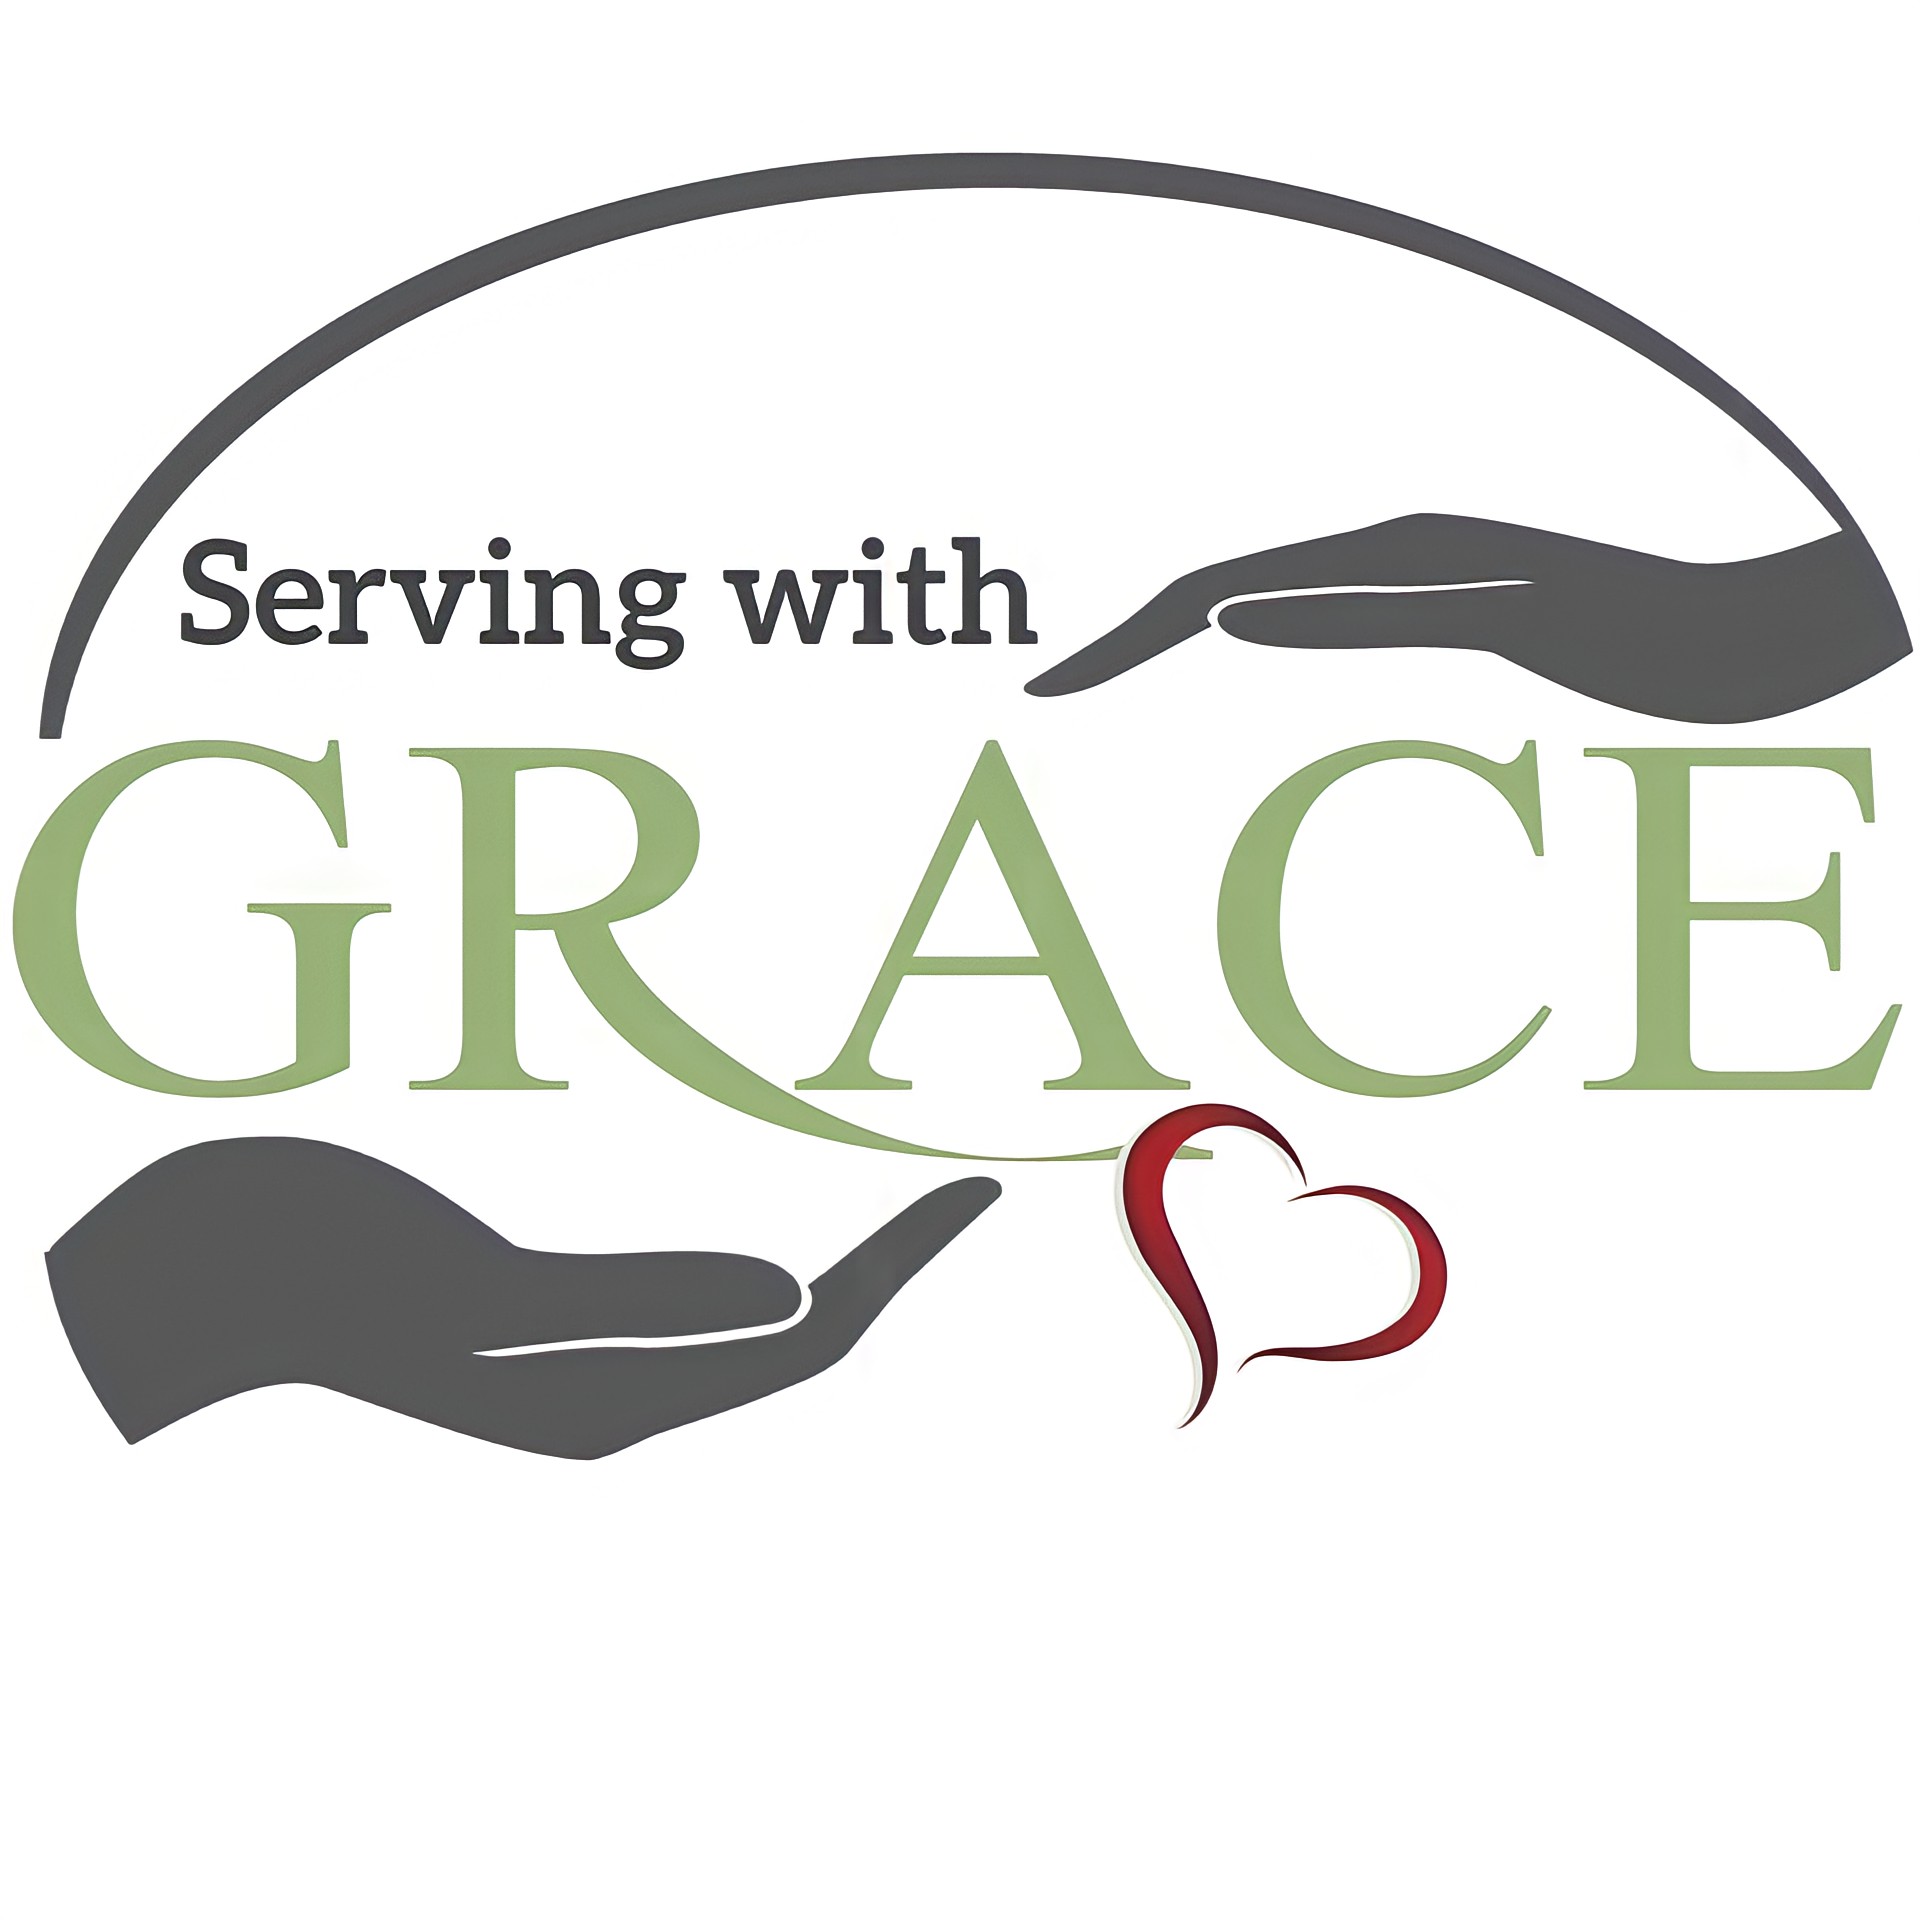 Serving with GRACE logo